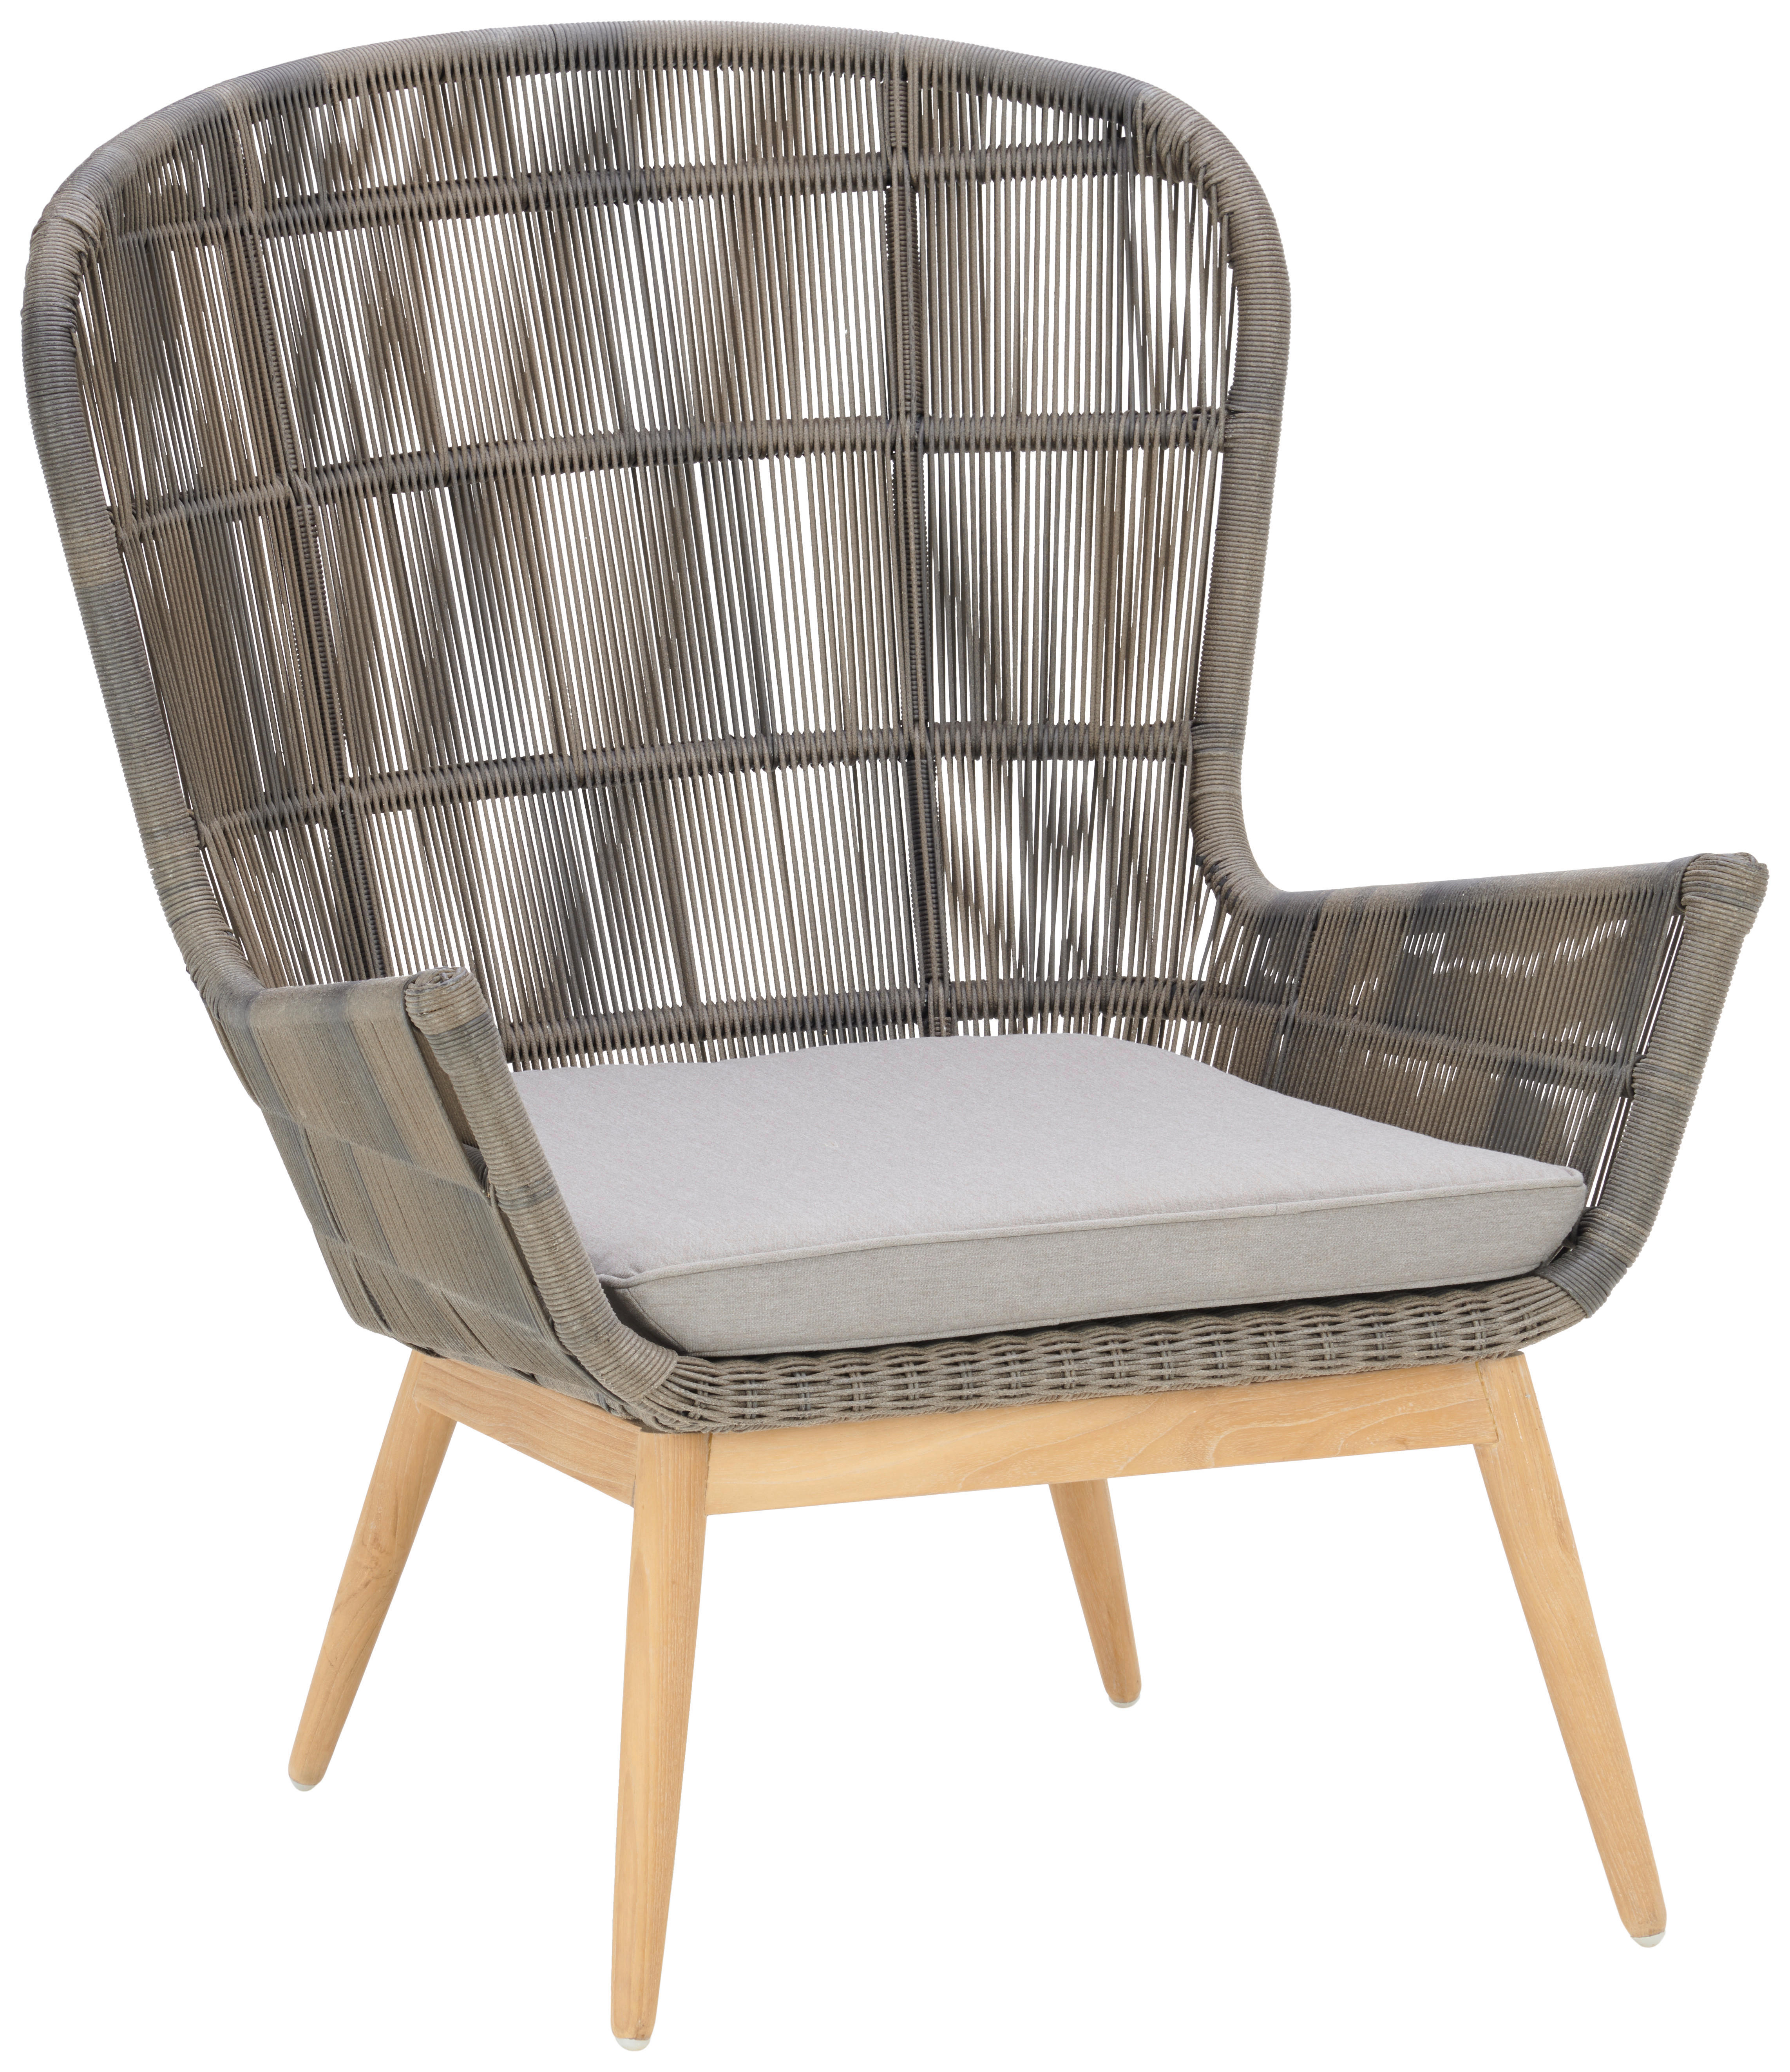 Loungesessel outdoor Holz online shoppen